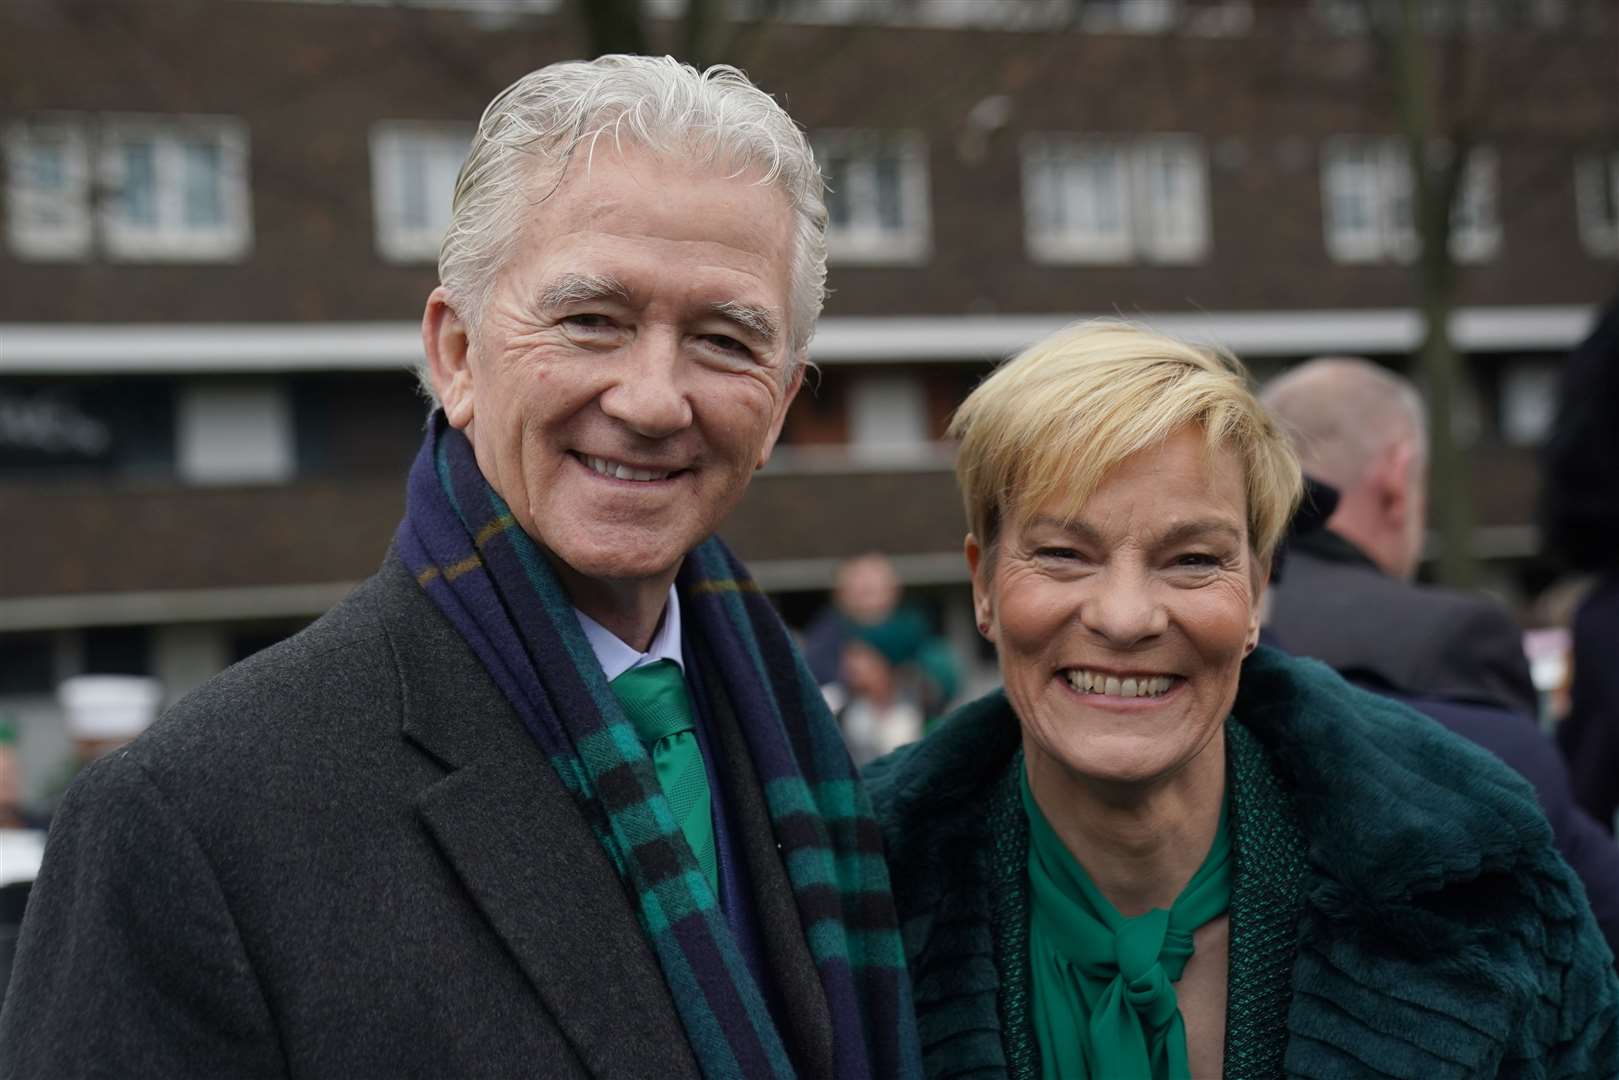 Actor Patrick Duffy and Vera Pauw, Republic of Ireland manager, wait at the start of the parade in Dublin (Brian Lawless/PA)